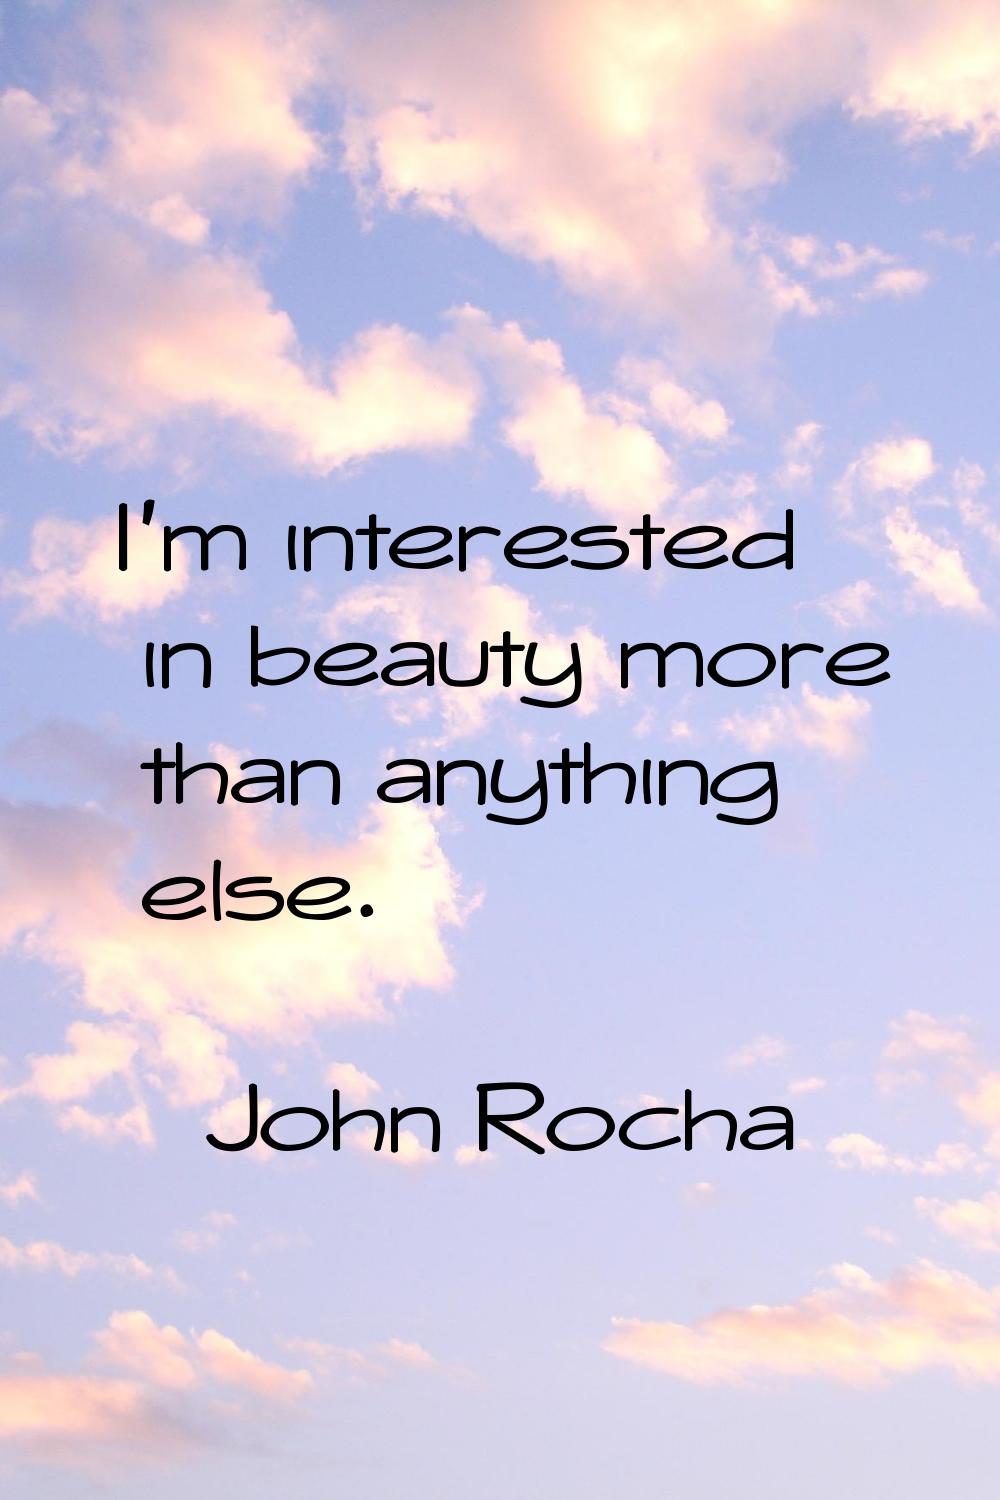 I'm interested in beauty more than anything else.